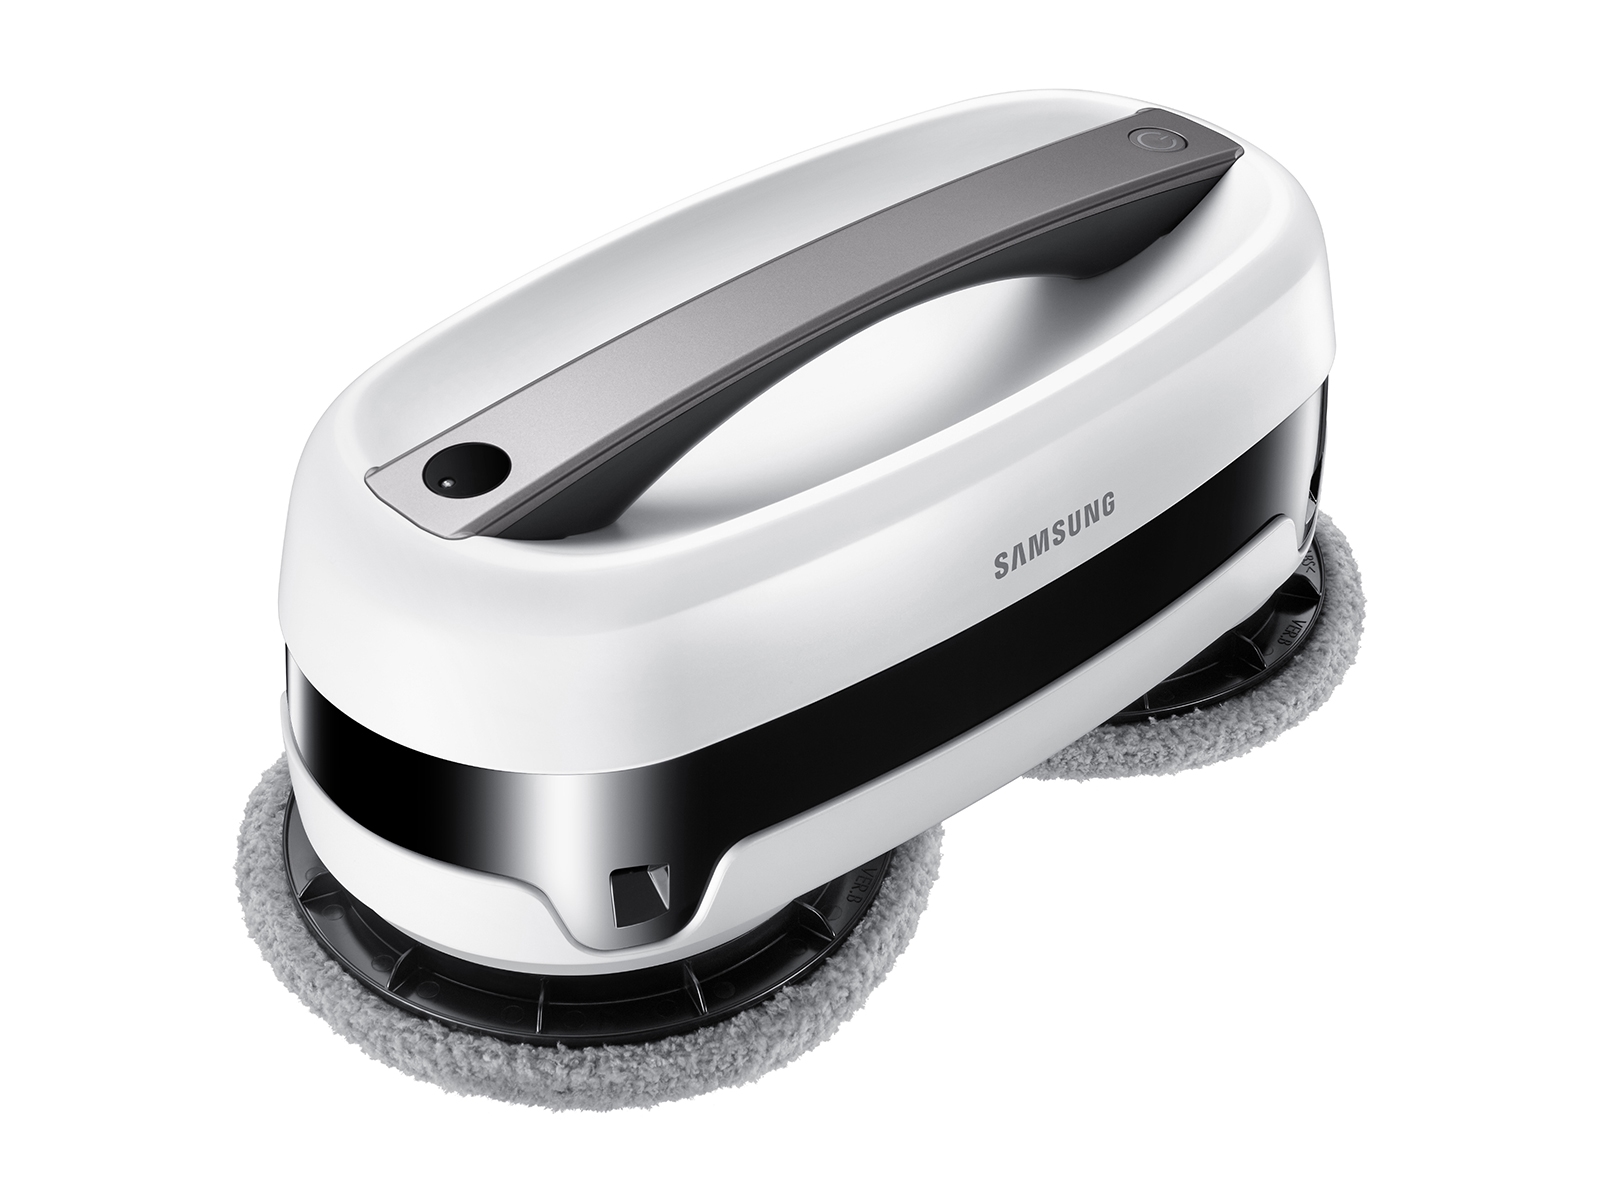 Thumbnail image of Jetbot Mop with Dual Spinning Technology in white